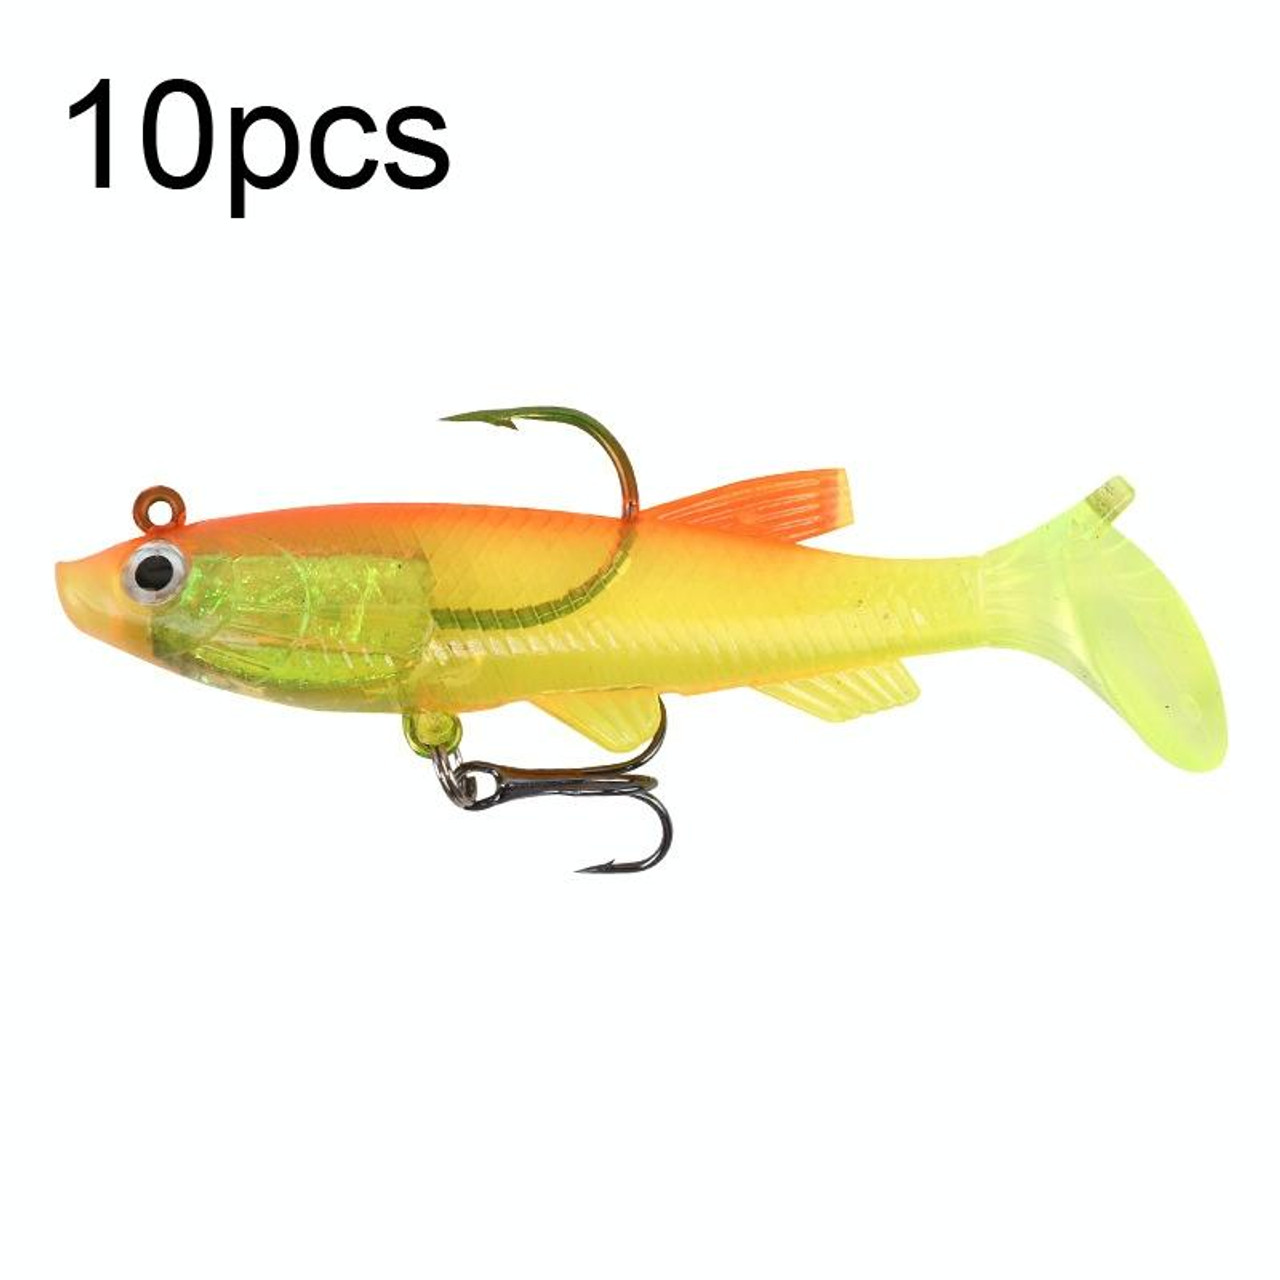 10pcs Roadrunner Soft Lures Leadheads Luminous Lures(Yellow T Tail),  snatcher